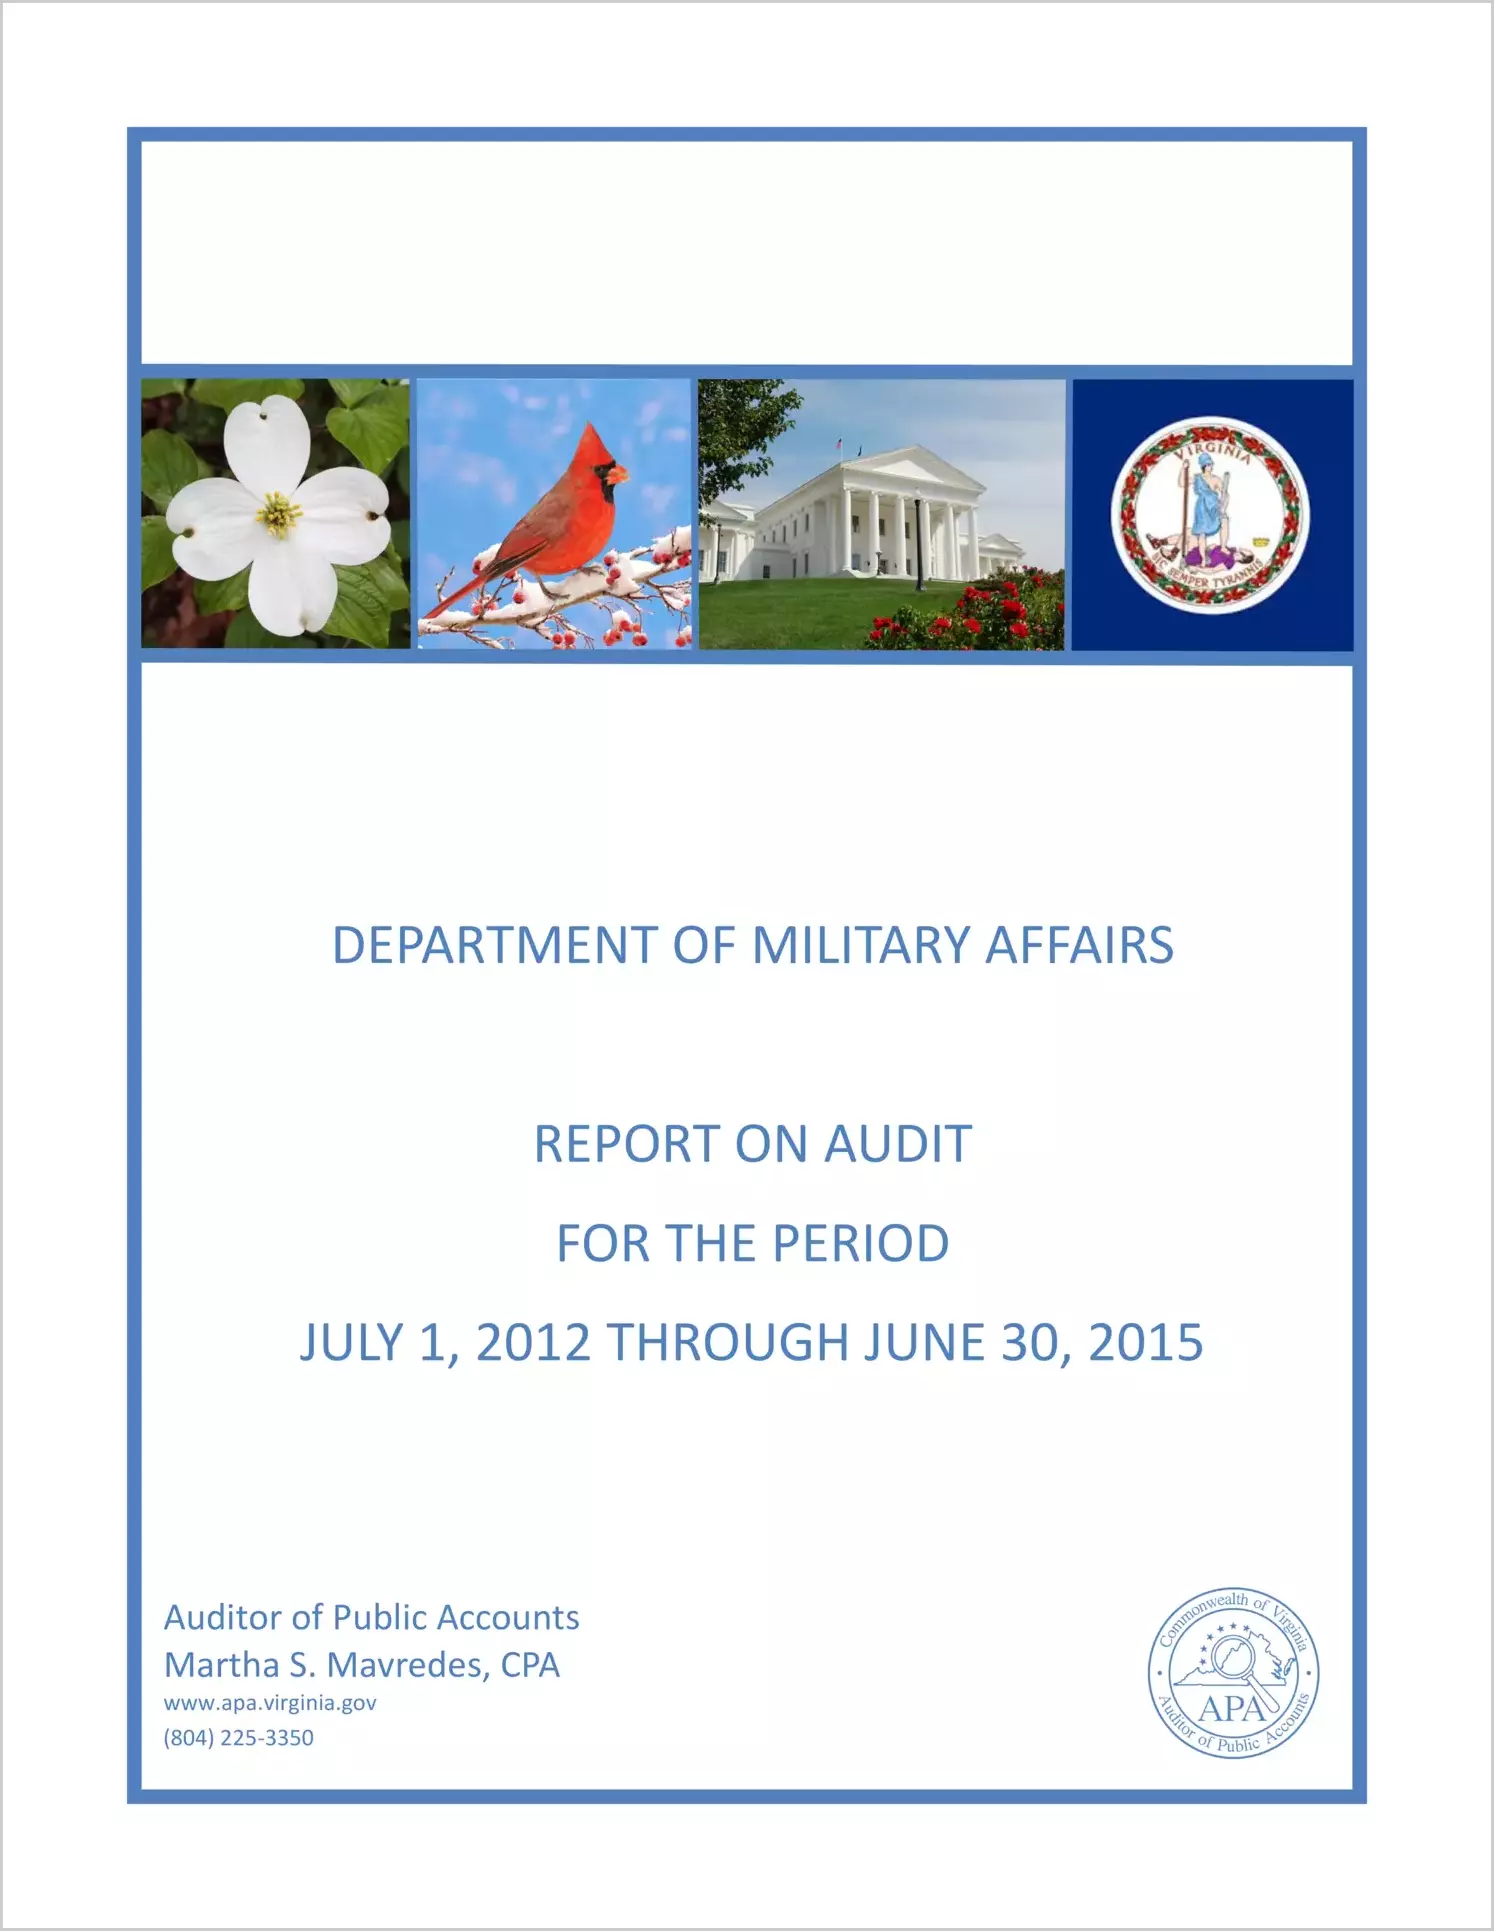 Department of Military Affairs for the period July 1, 2012 through June 30, 2015